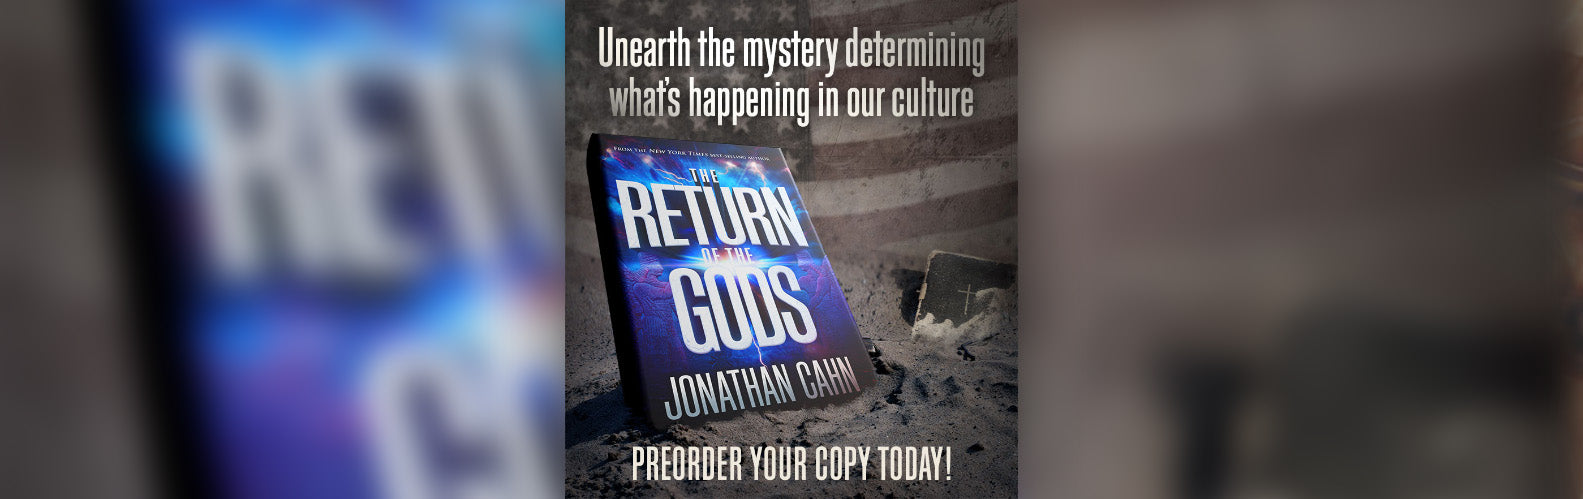 Jonathan Cahn unmasks hidden deities of old infiltrating America in jaw-dropping new book, ‘The Return of the Gods’